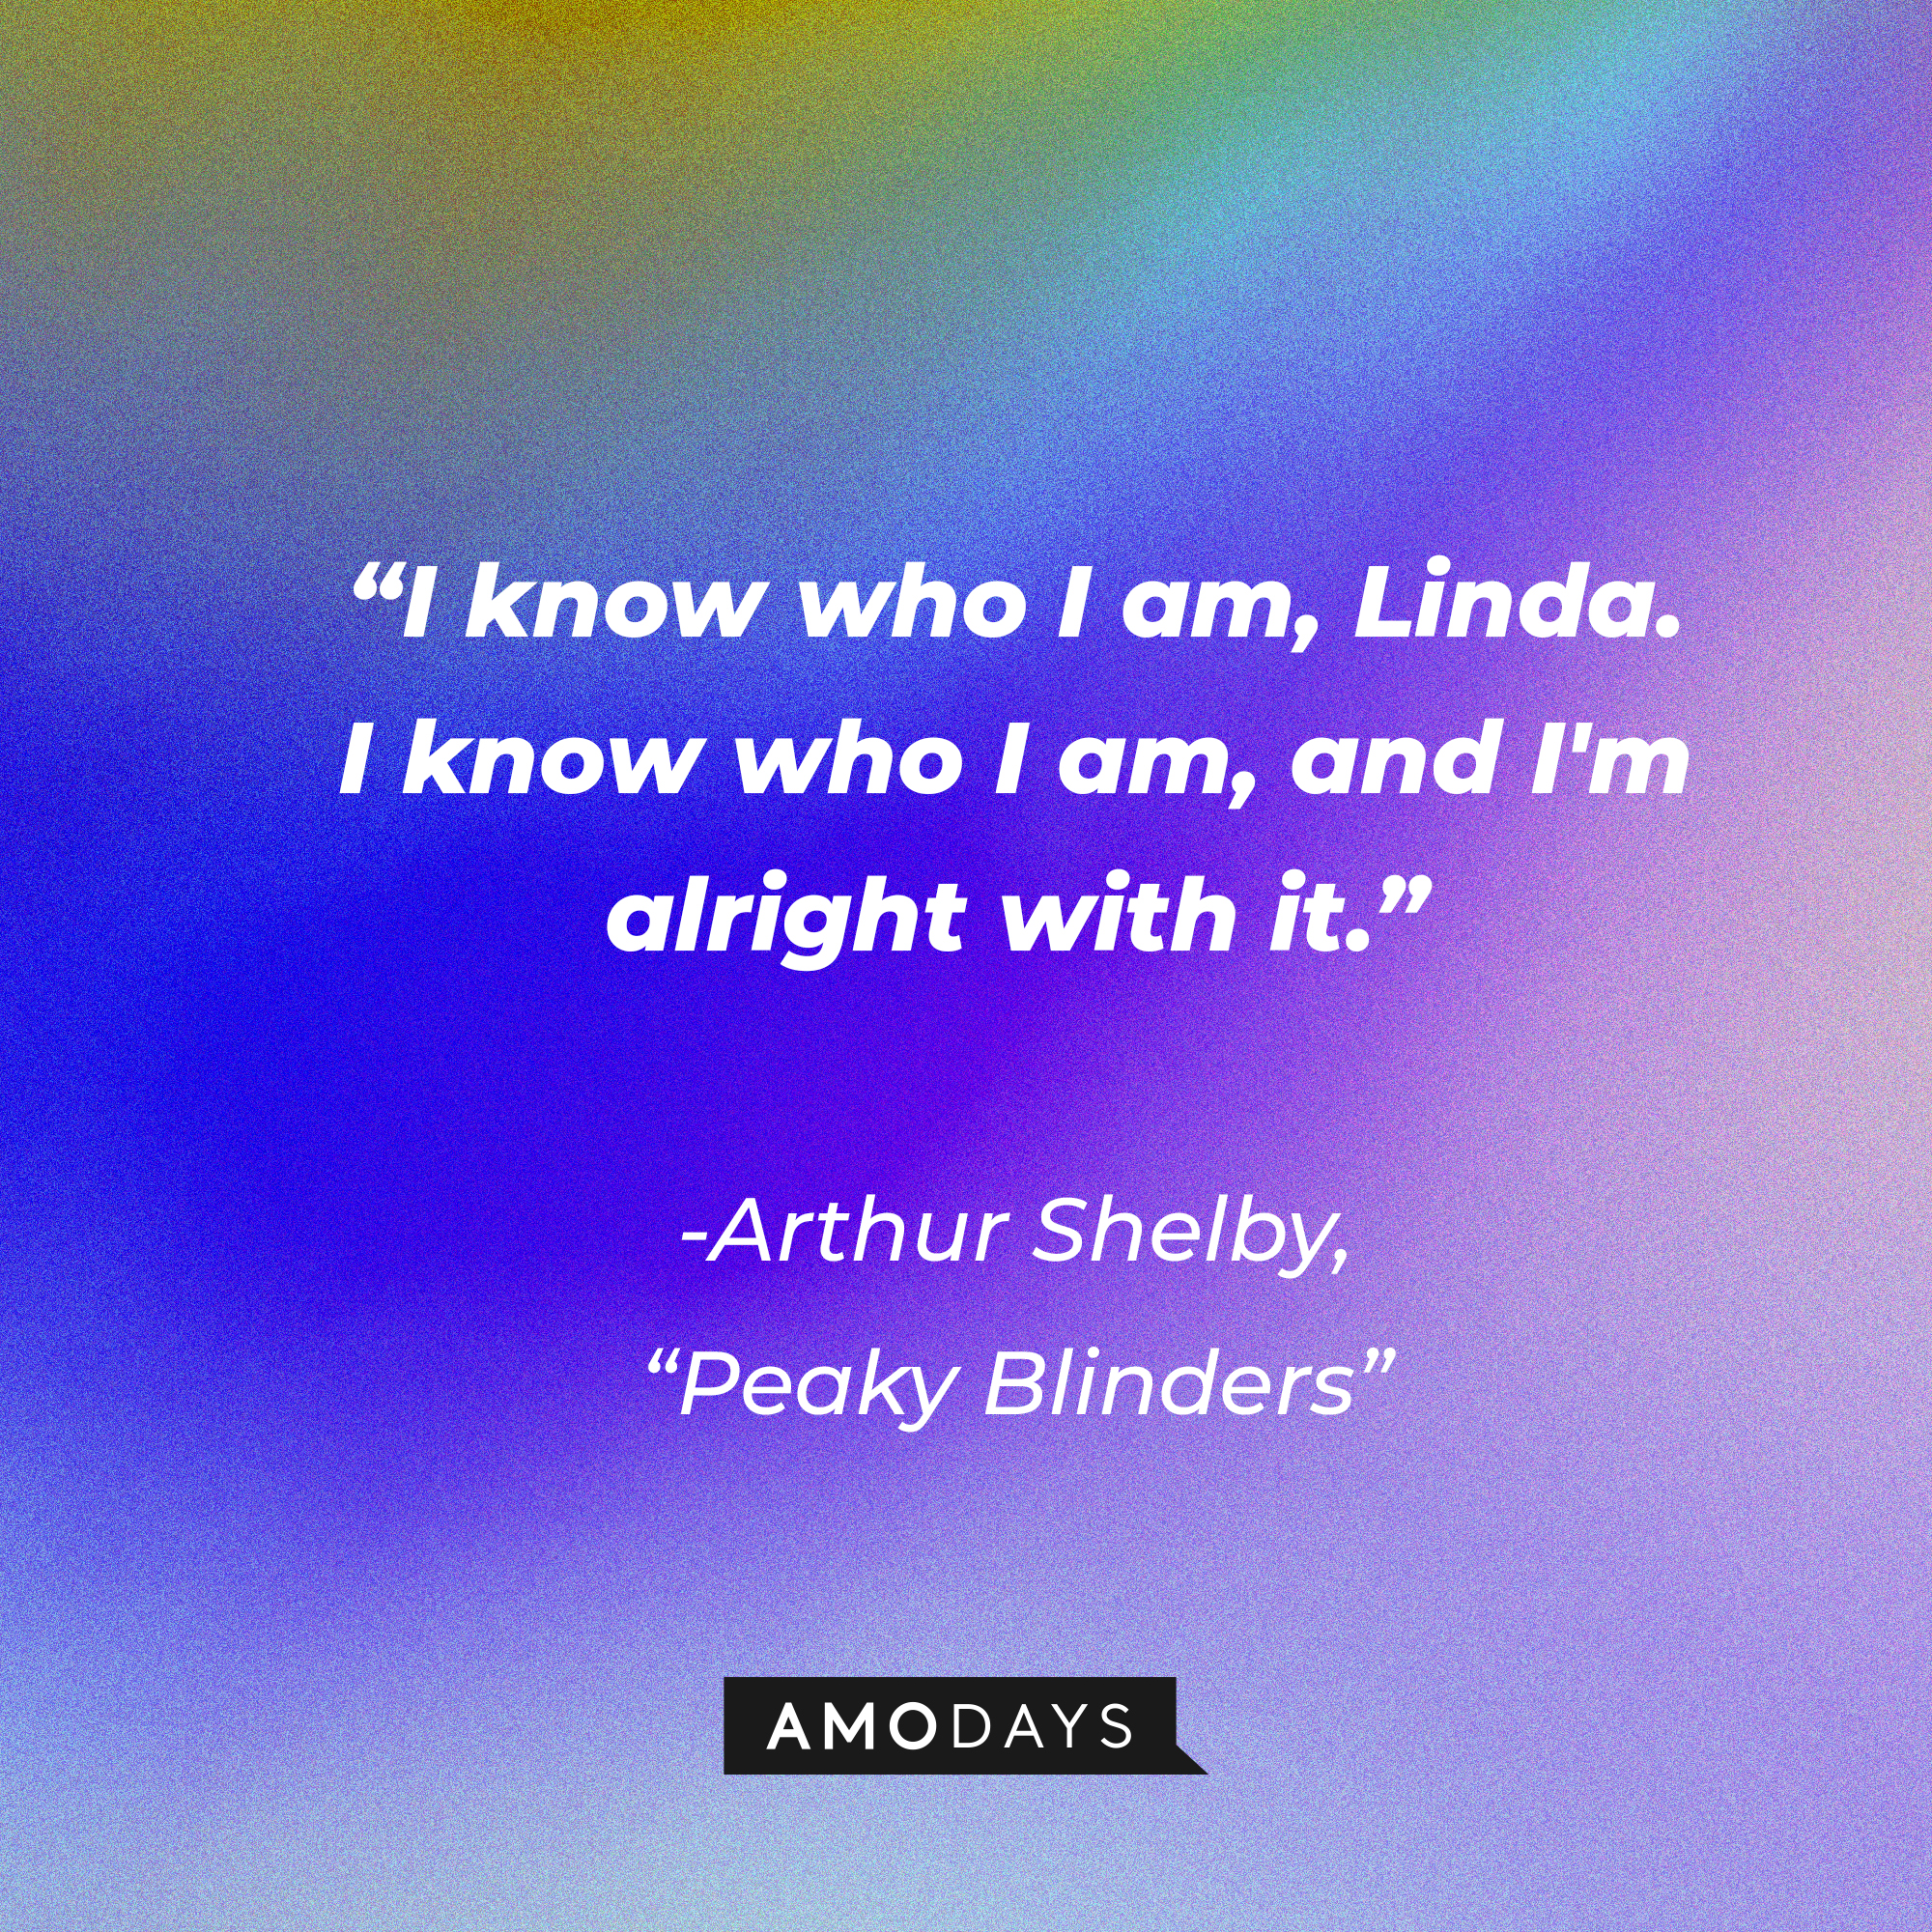 Tommy Shelby's his quote in "Peaky Blinders:" "I know who I am, Linda. I know who I am, and I'm alright with it." | Source: Facebook.com/PeakyBlinders